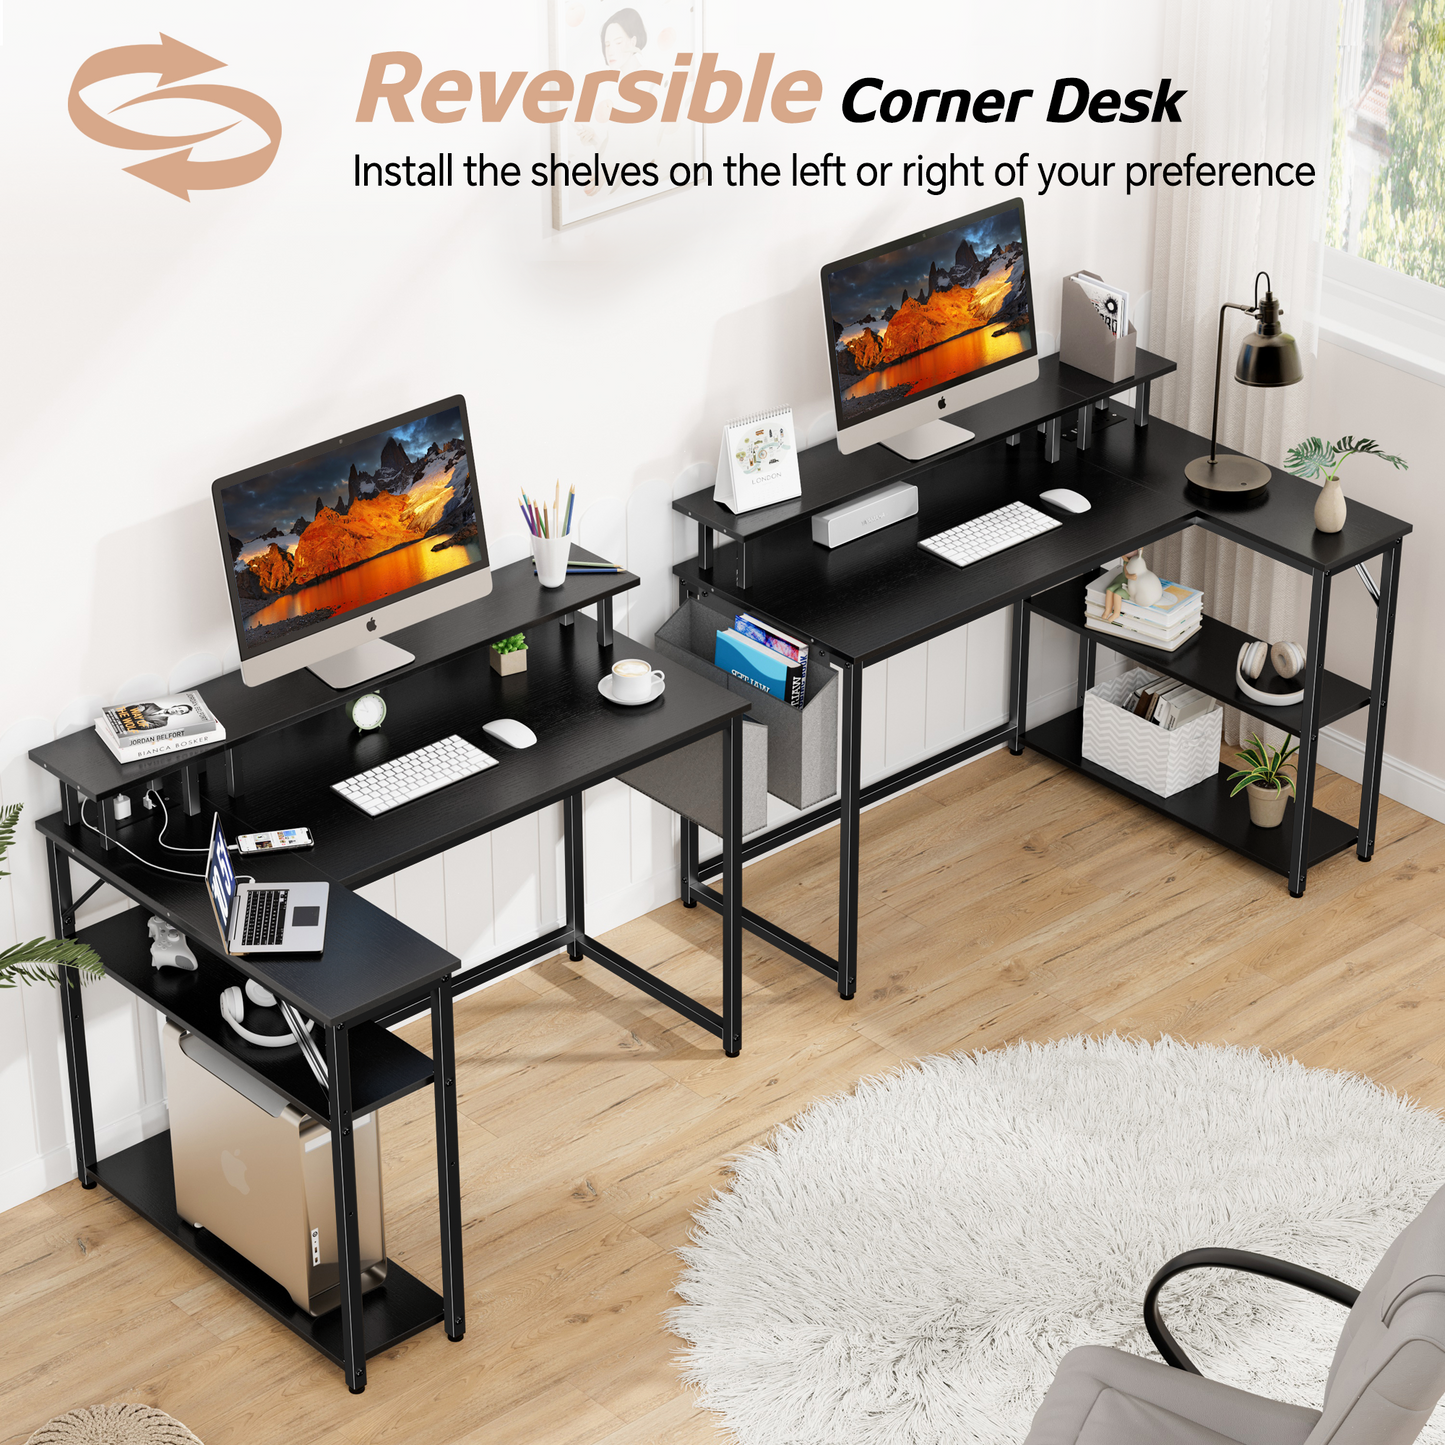 Mr IRONSTONE L Shaped Desk with Power Outlets & LED Lights, Computer Desk with Long Monitor Stand, 47 Inch Office Desk, Corner Desk for Small Space, Home Office Desk, Black